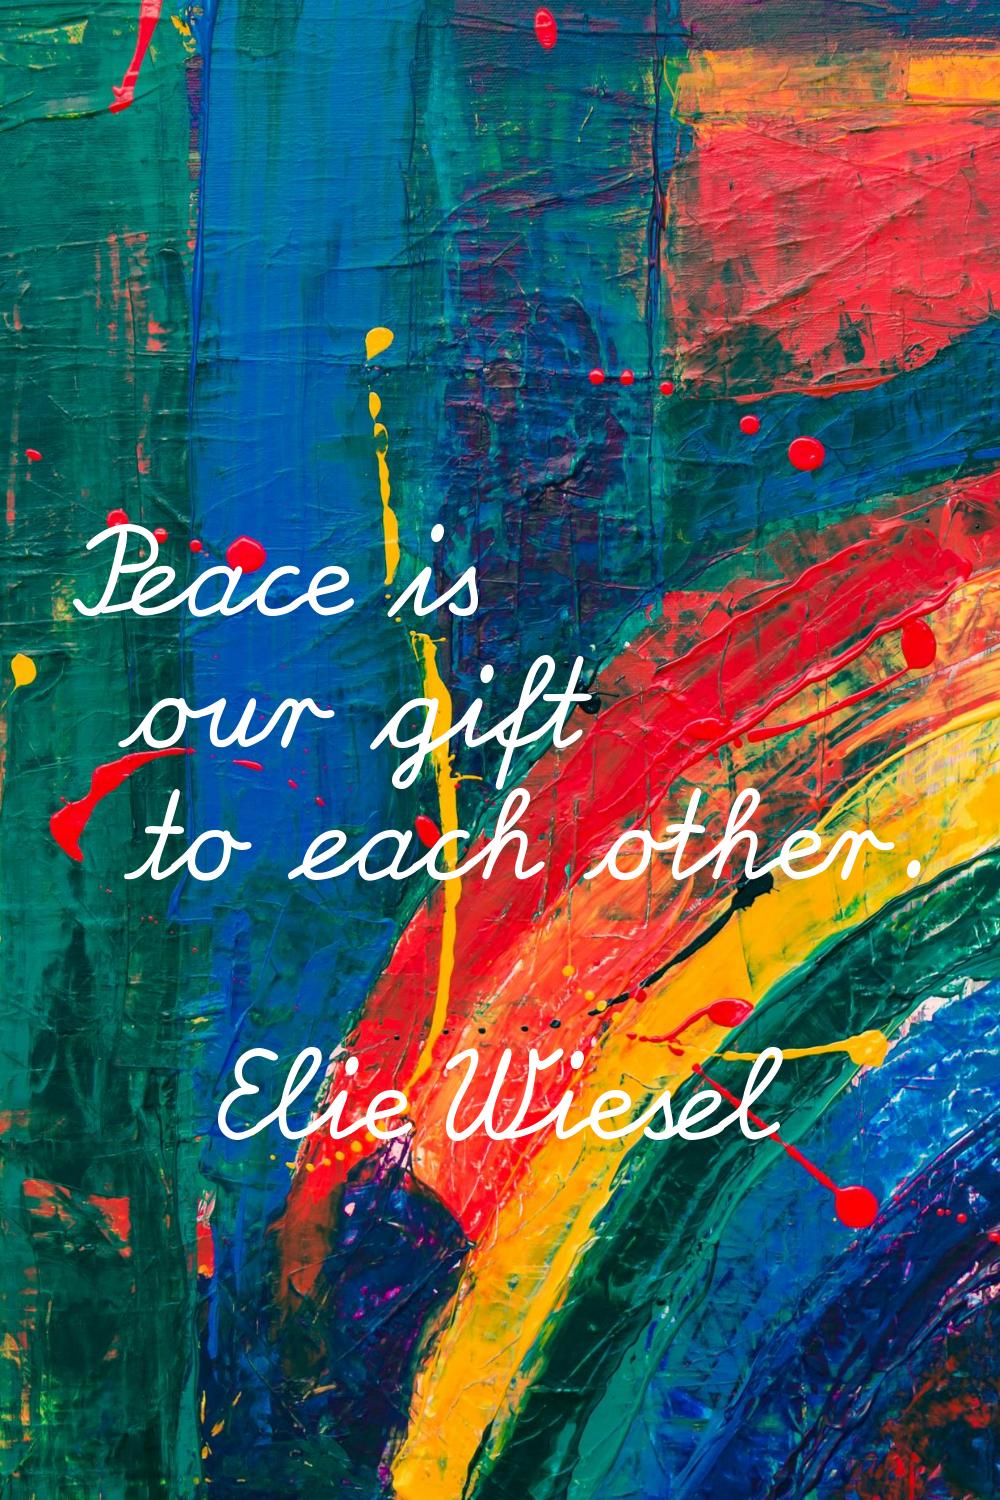 Peace is our gift to each other.